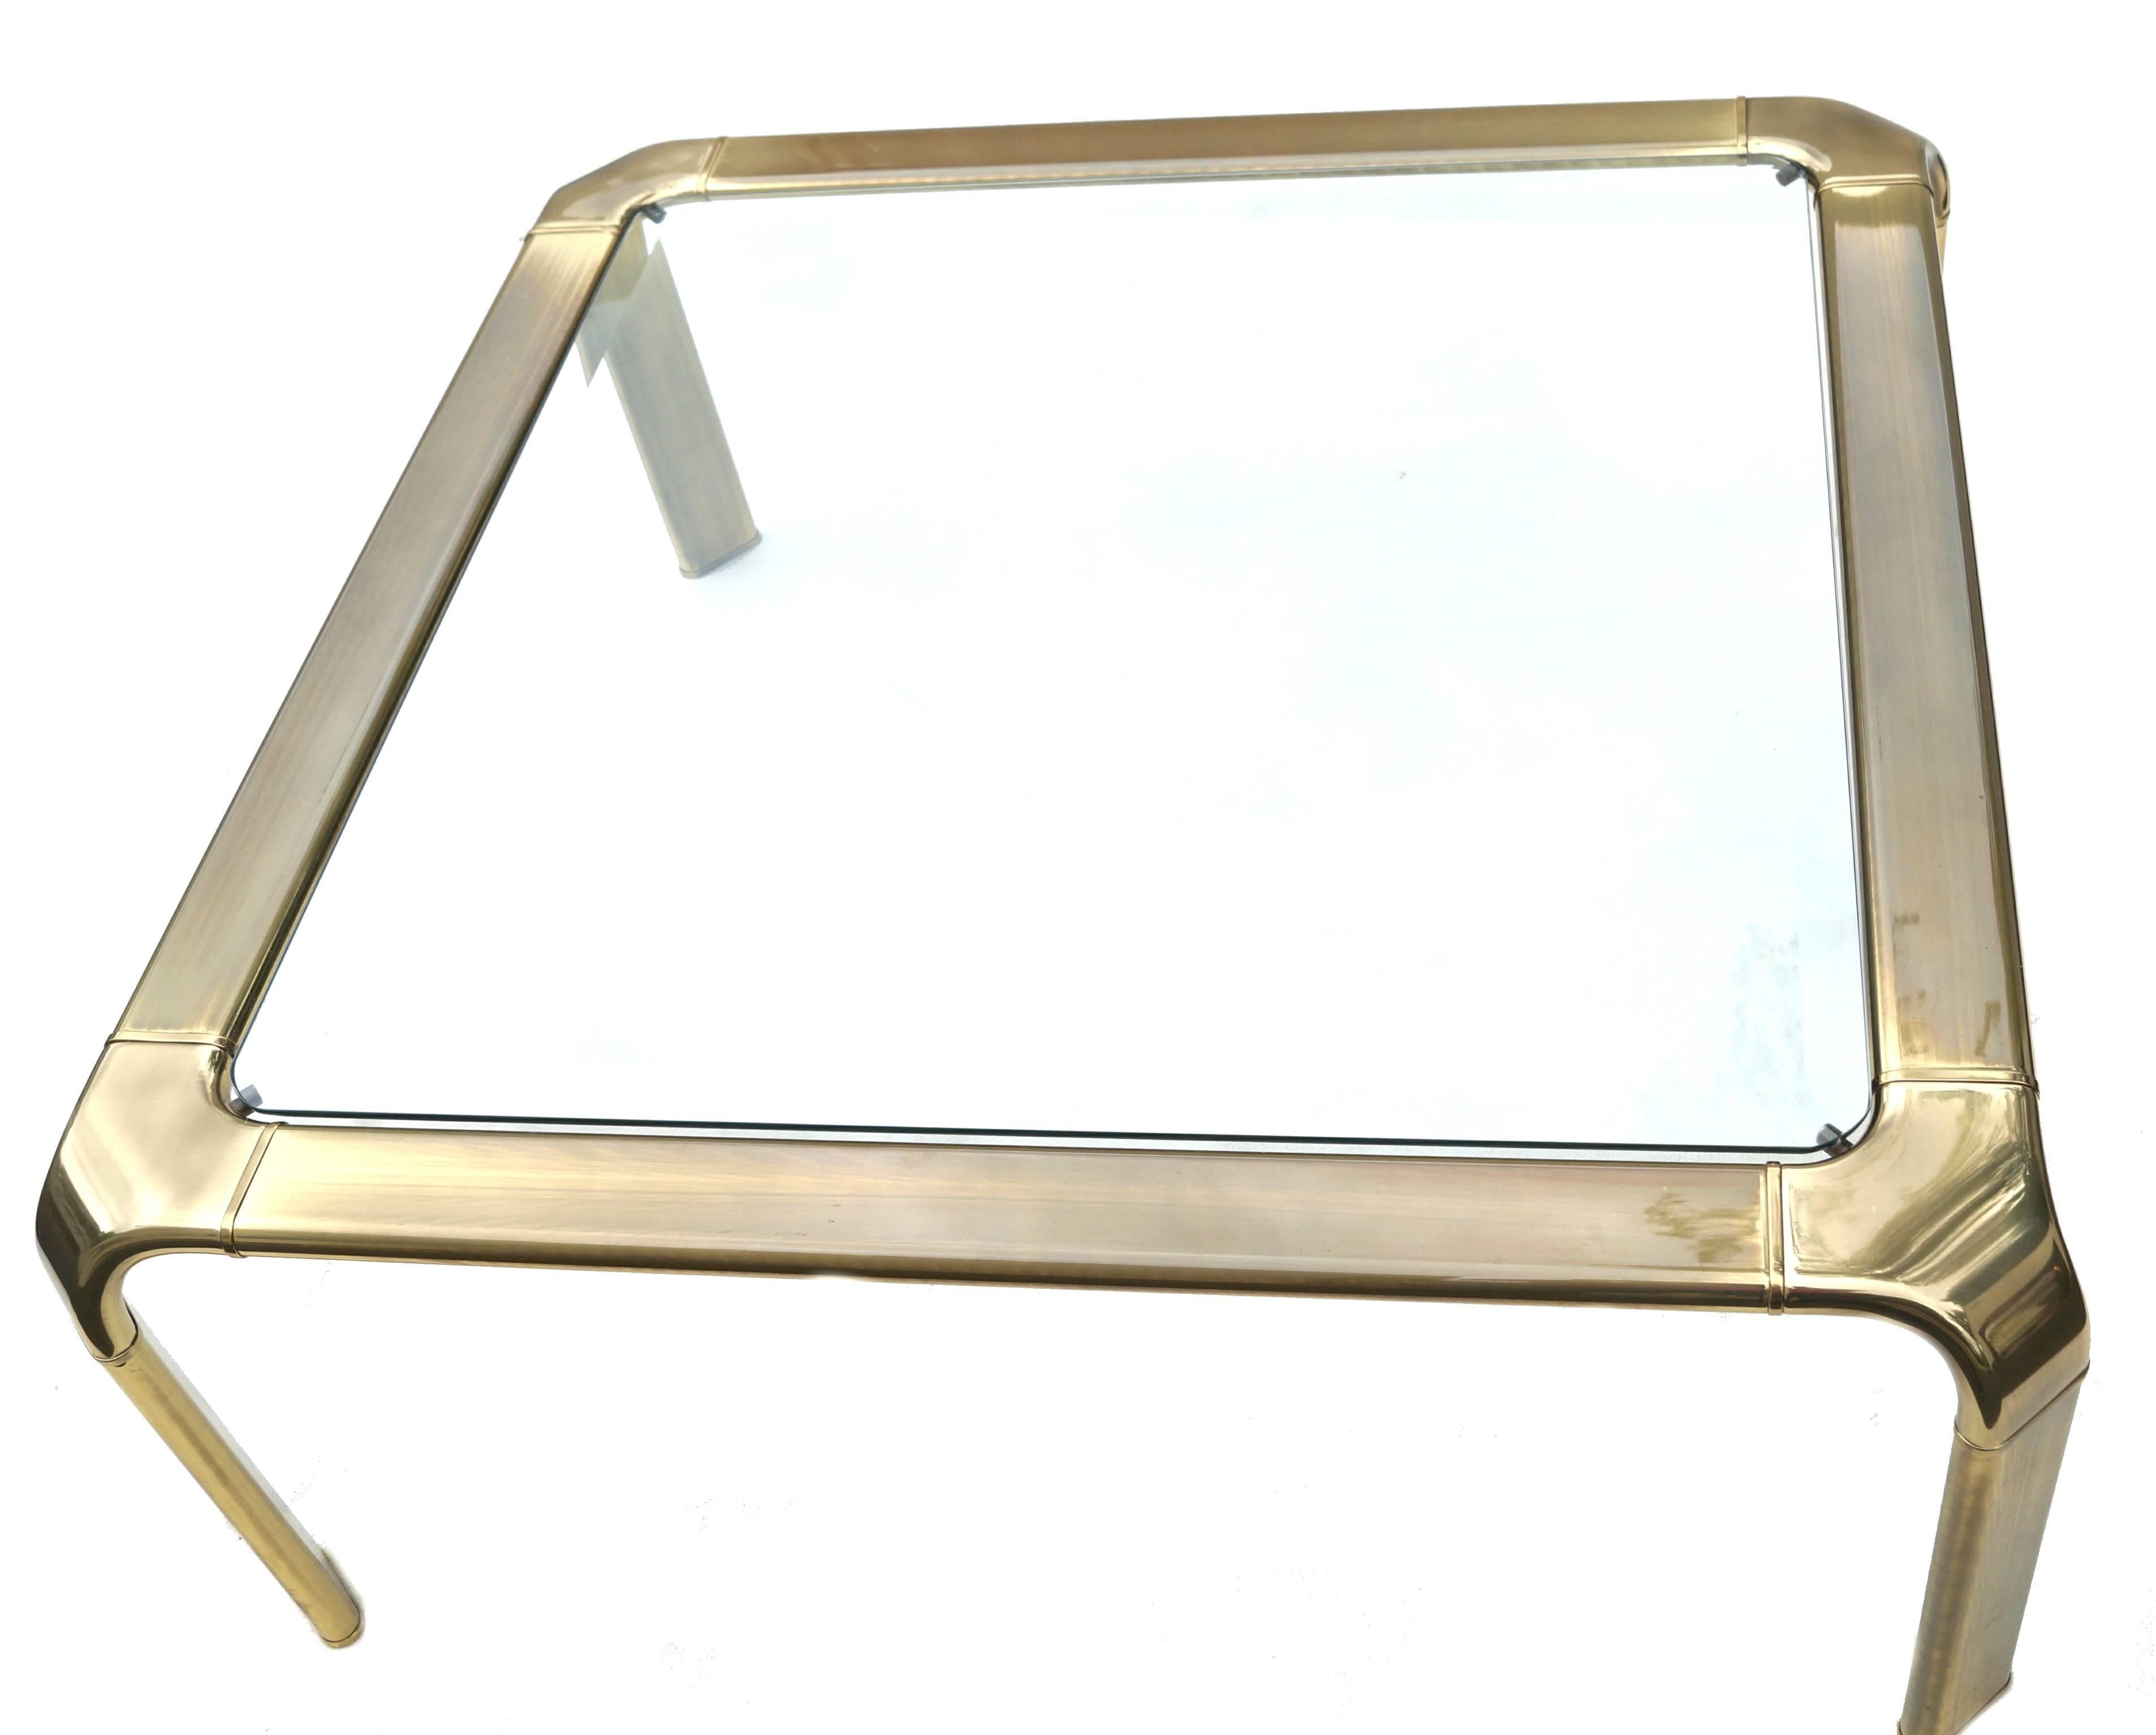 Mastercraft Hollywood Regency brass and glass coffee table. If you are in the New Jersey , New York City Metro Area , please contact us with your delivery zip code, as we may be able to deliver curbside for less than the calculated White Glove rates